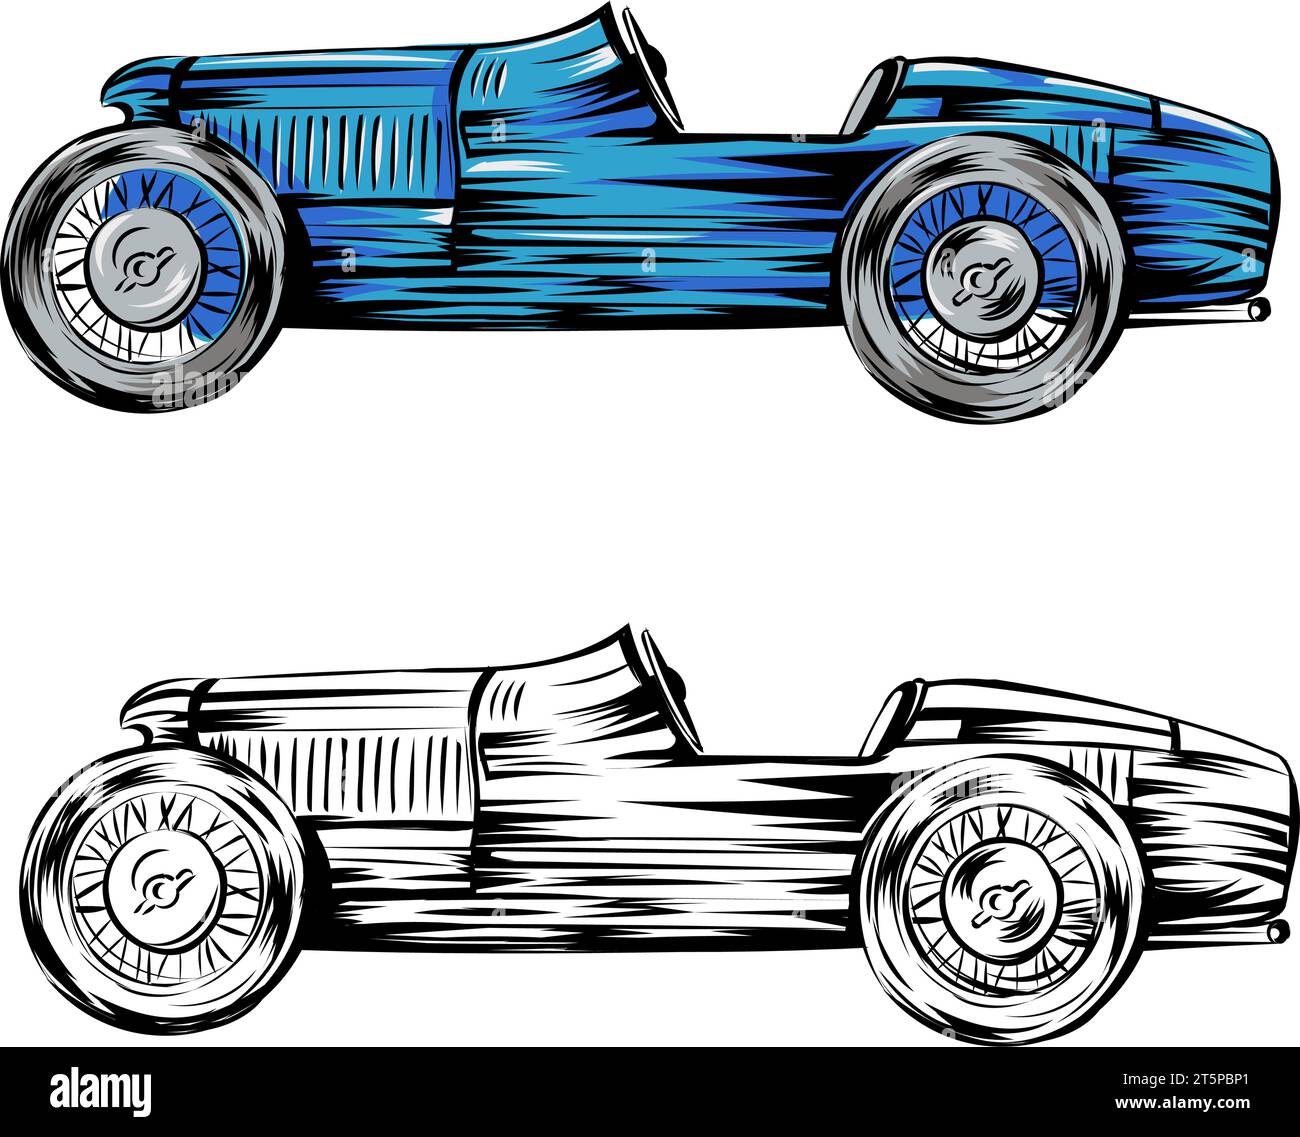 blue vintage racing car design isolated on a white background. vector illustration Stock Vector